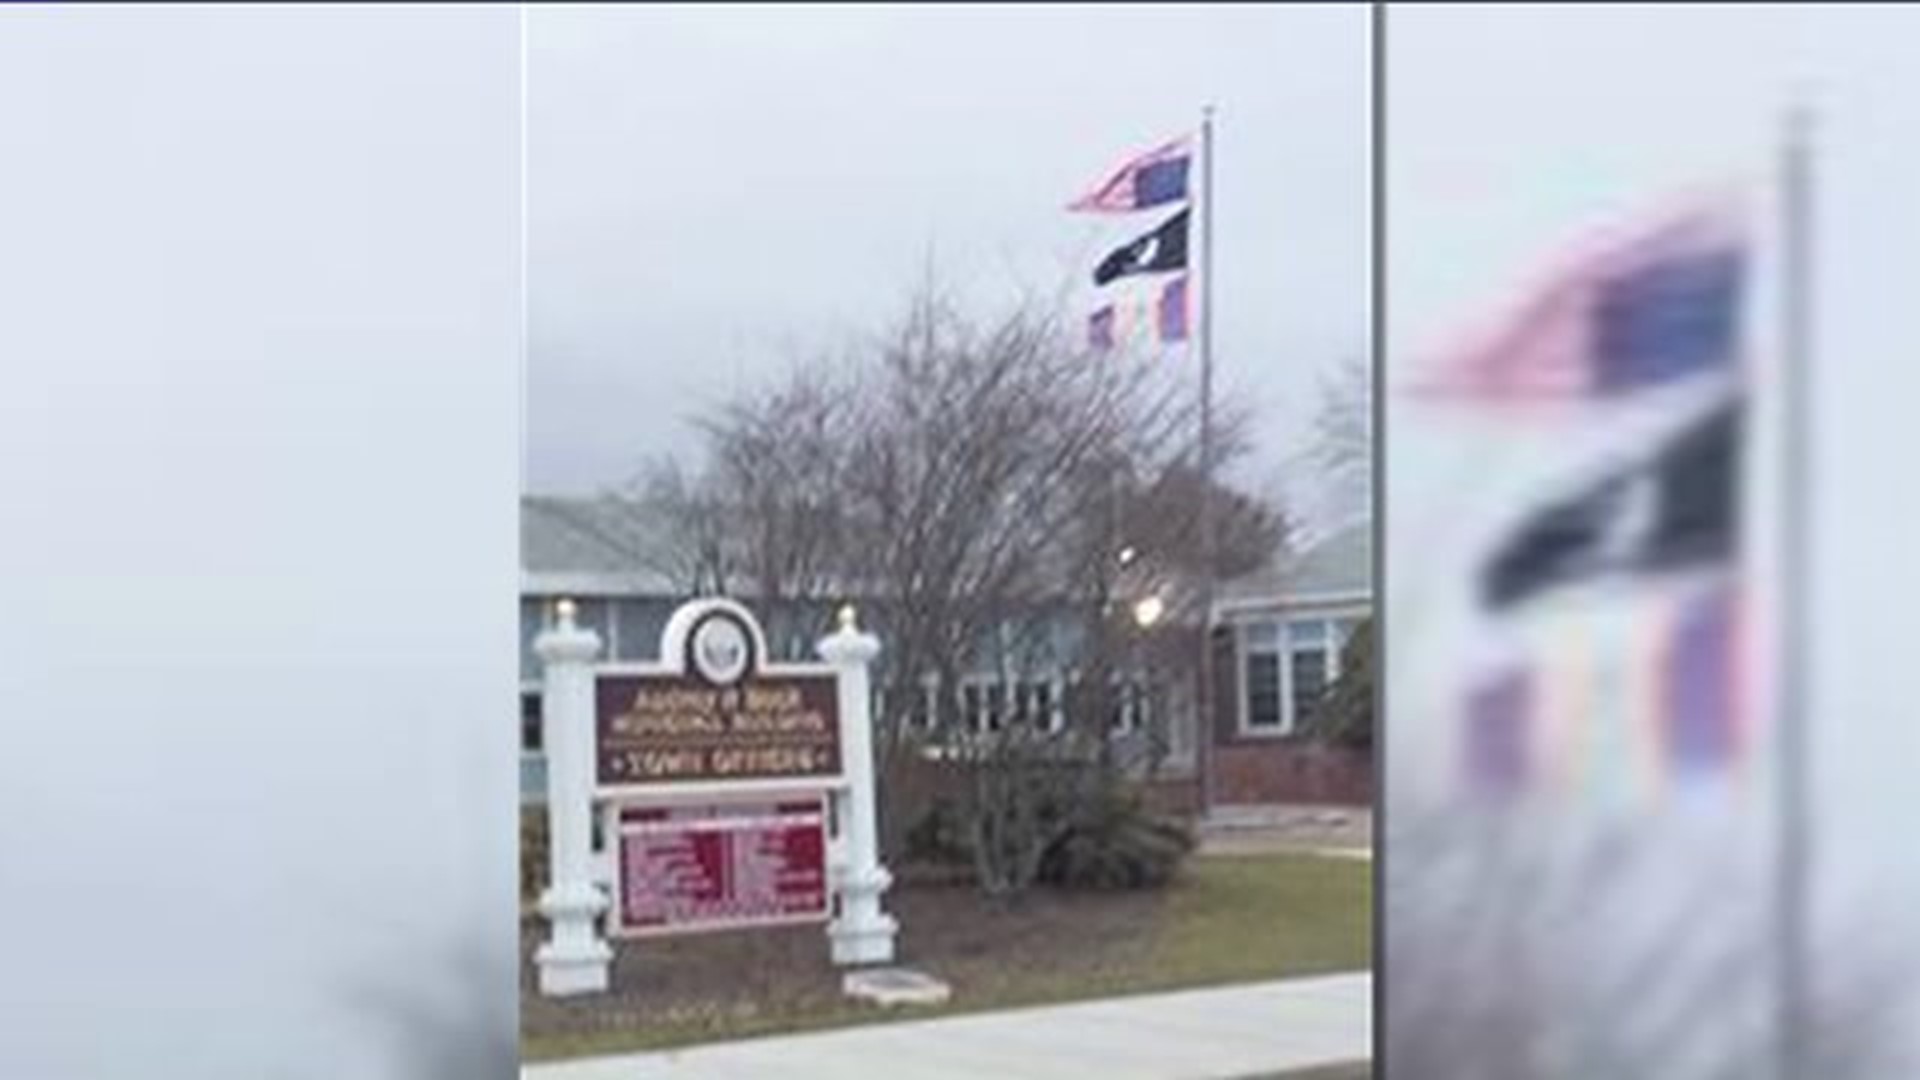 Controversy over upside down American flag in Mansfield